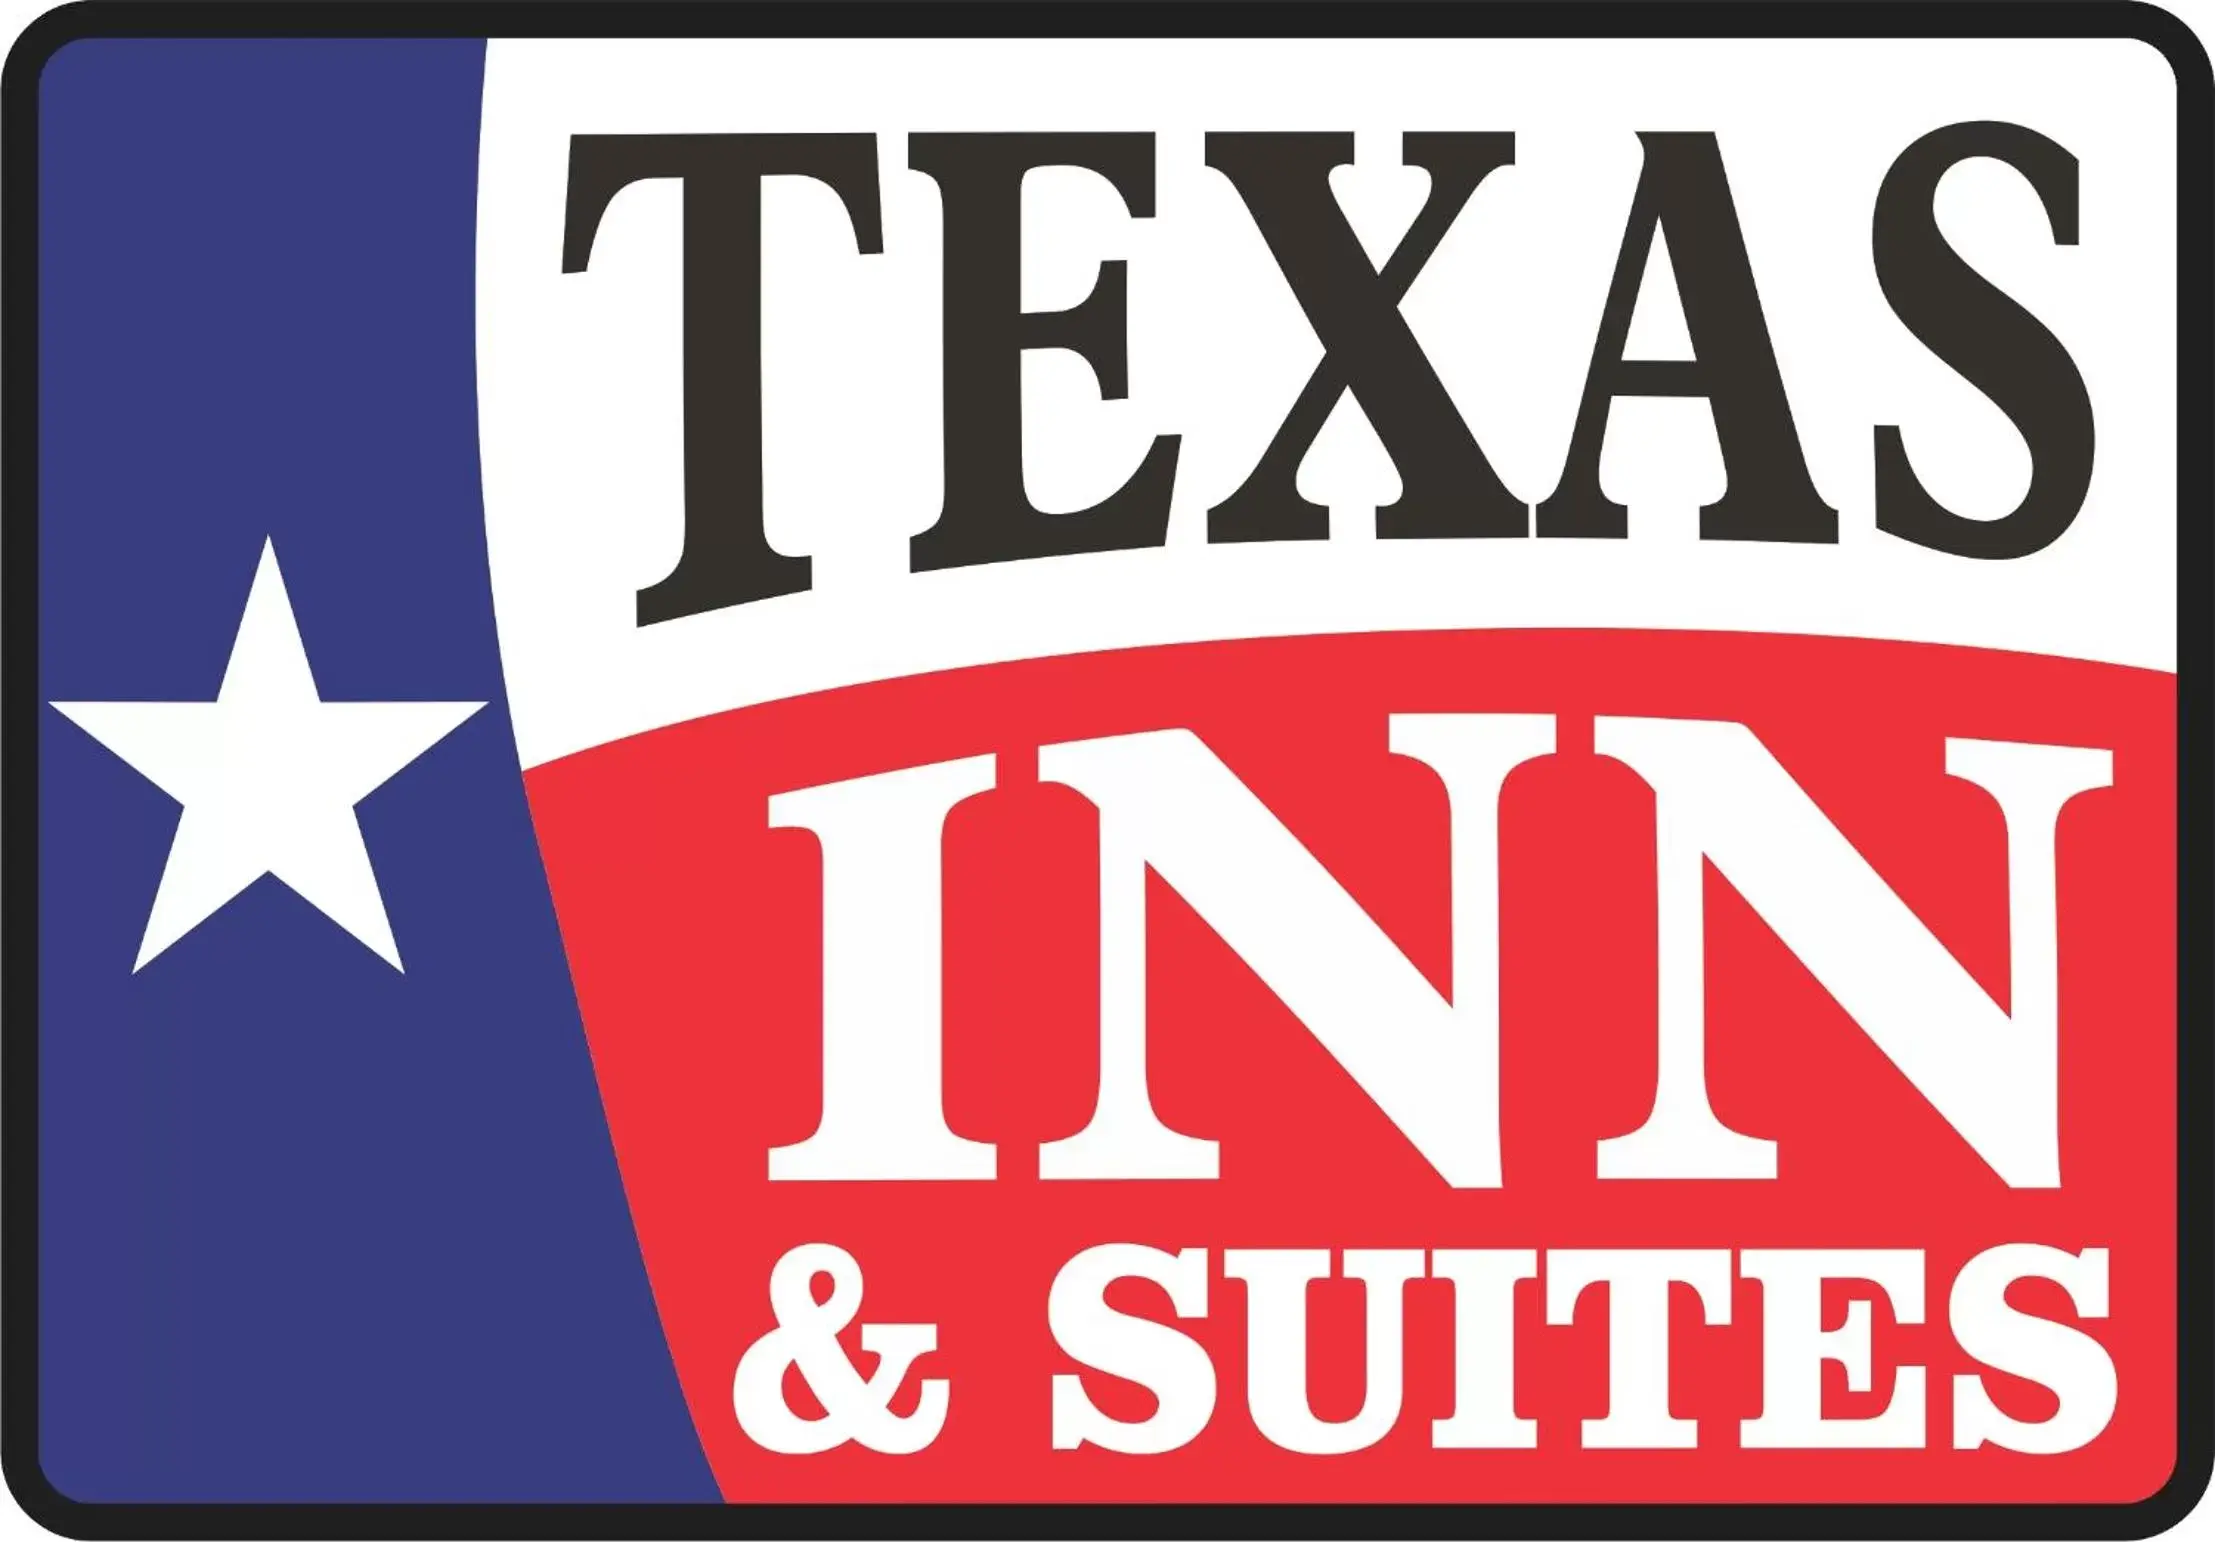 Property logo or sign, Property Logo/Sign in Texas Inn & Suites McAllen at La Plaza Mall and Airport